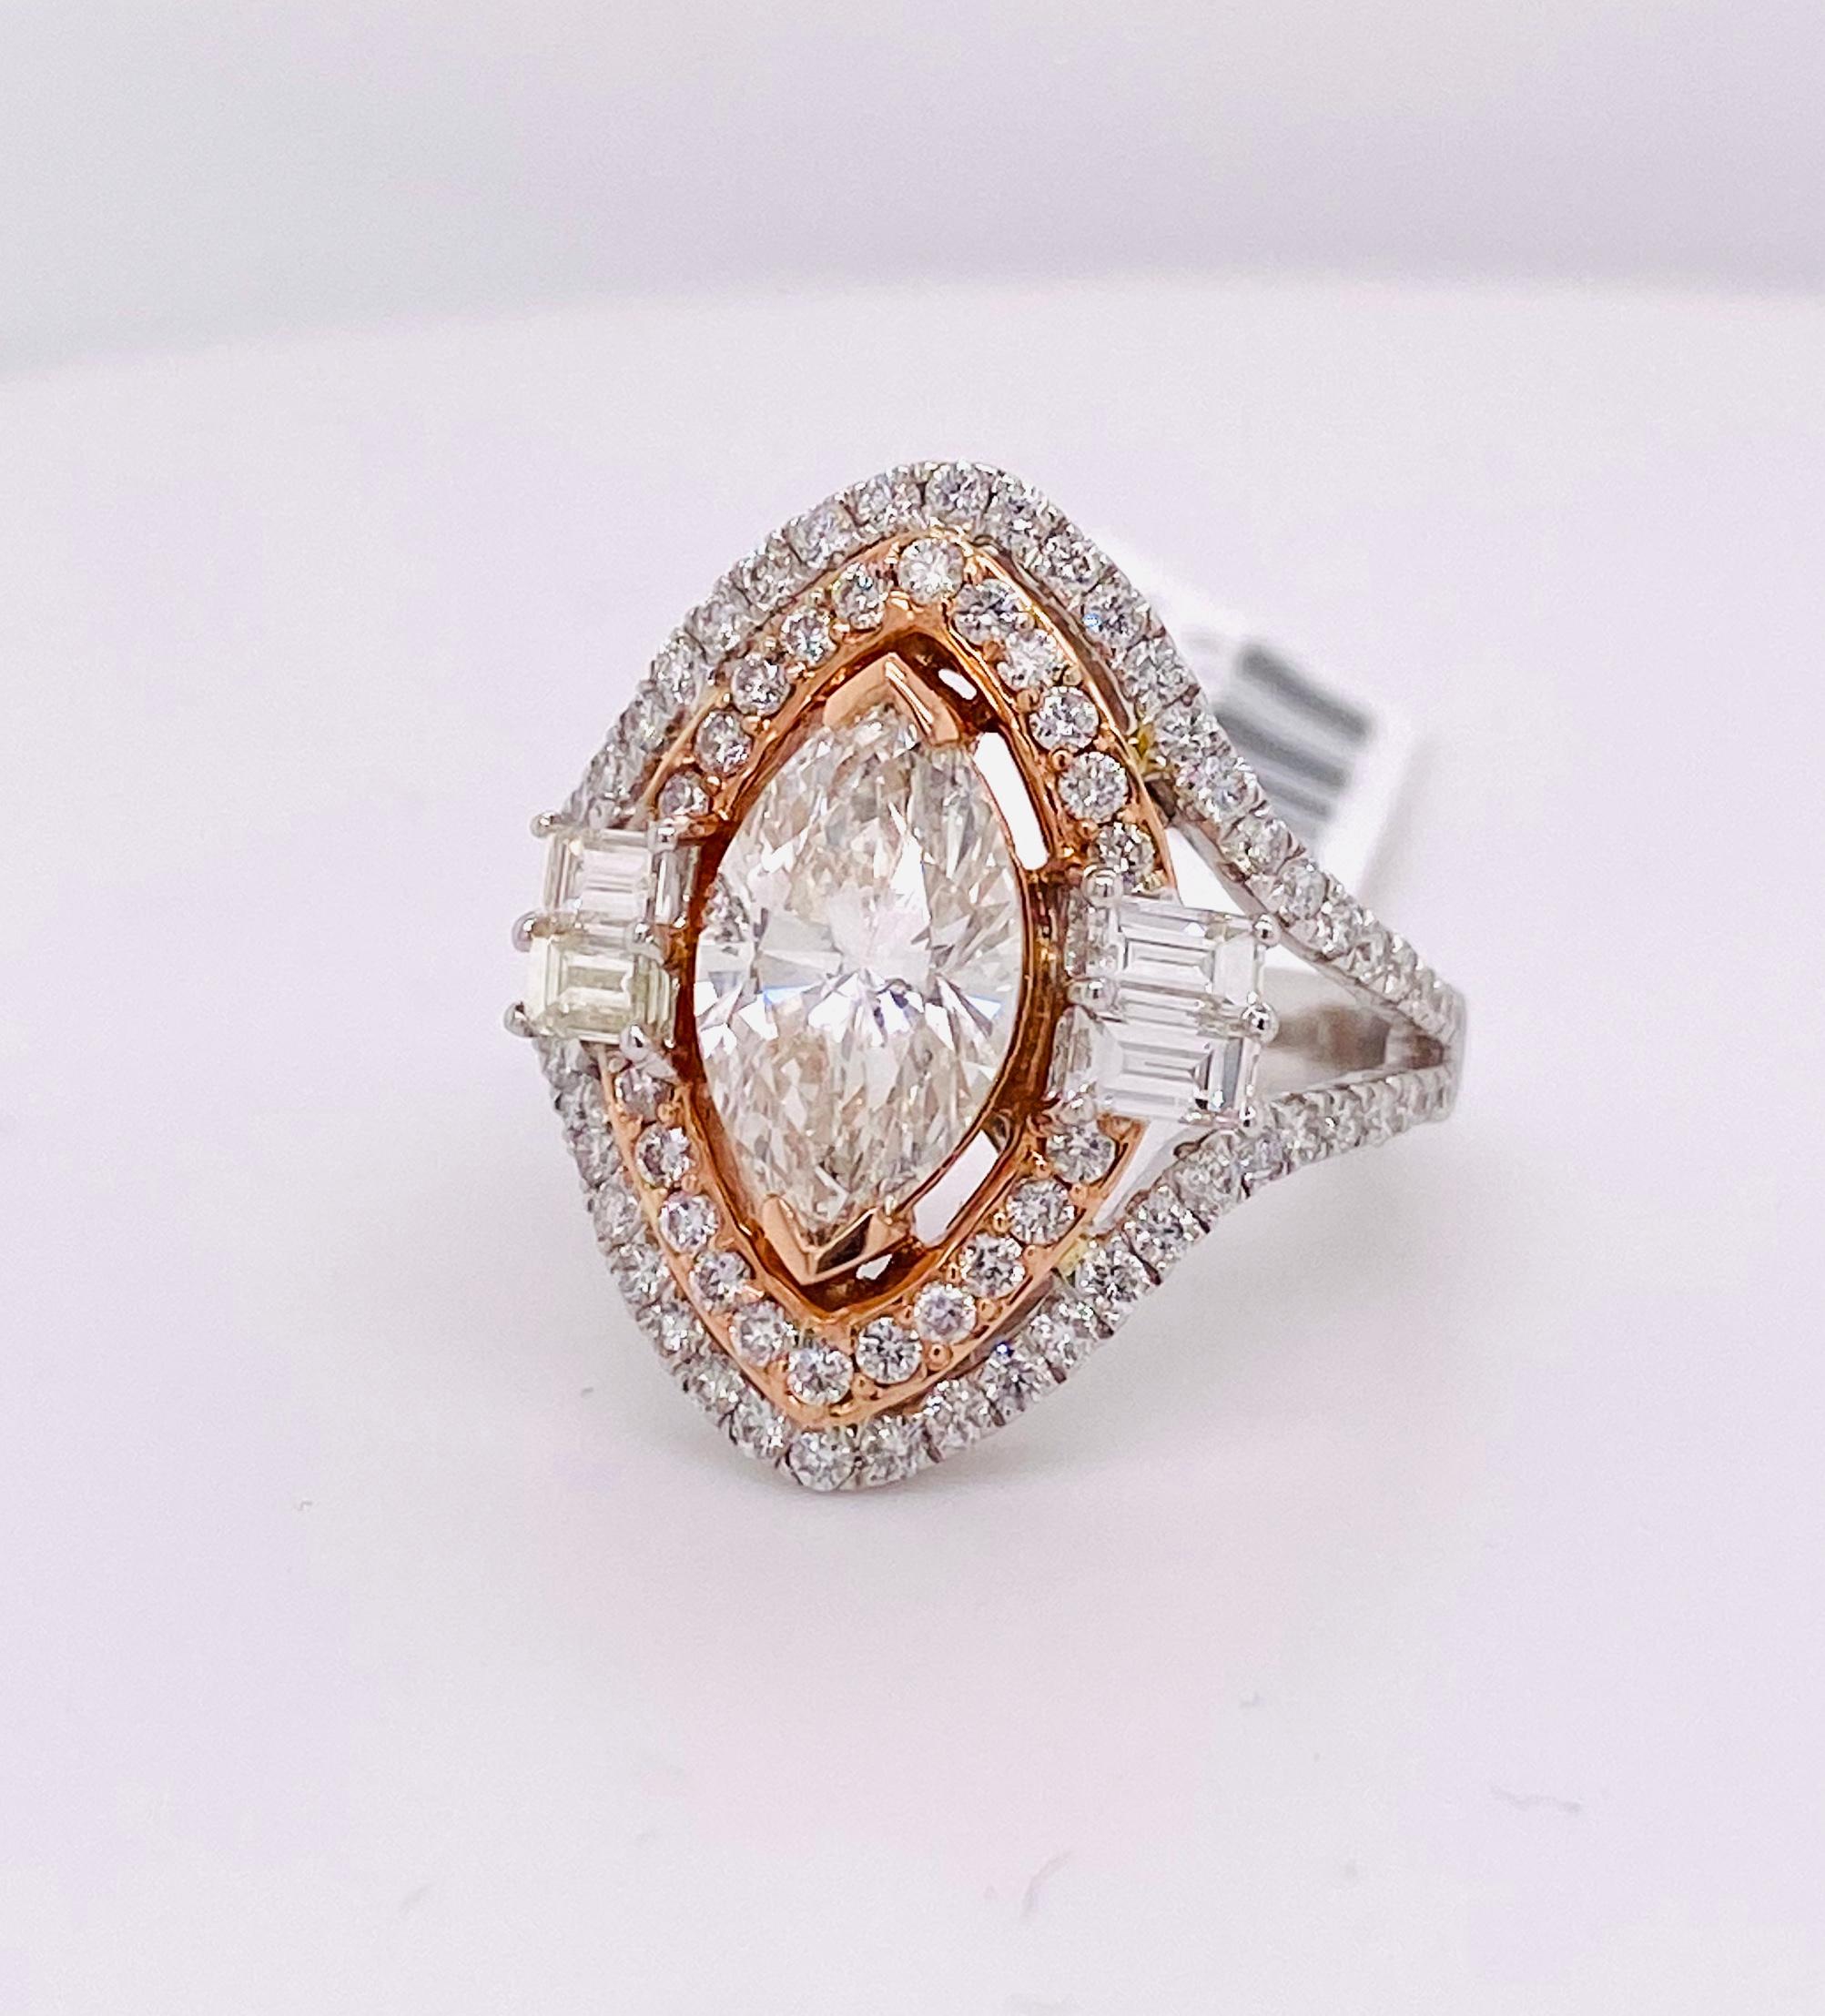 Diamond Marquise and Baguettes Split Shank Engagement Ring in 14K Two Tone RG/WG
Marquise: 2.04 / Dia: 0.939 / B: 0.643
Color: H/I / Clarity: SI
Size: 7 US
Weight: 7.1 Grams

One Of a Kind